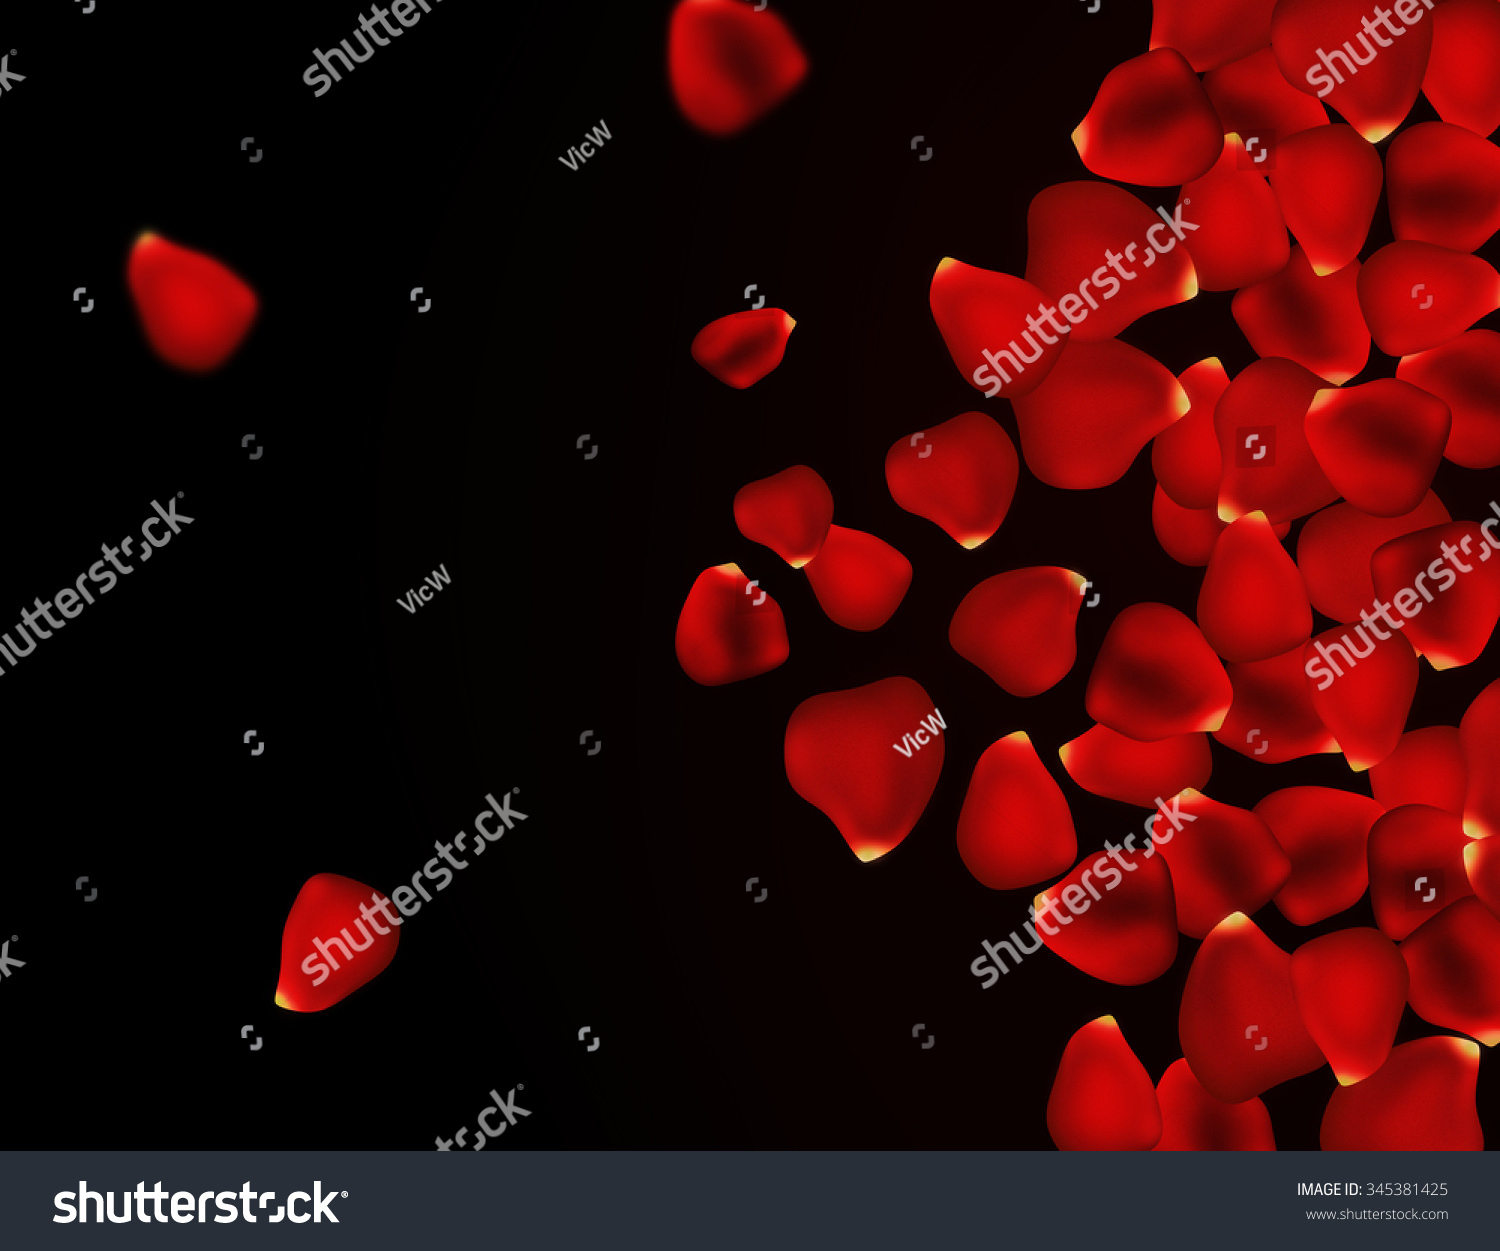 Romantic and sweet Valentine's Day background. Rose petals background on black. Beautiful deep red roses petal with space for text. Trendy and elegant wallpaper perfect for party invitation. #345381425